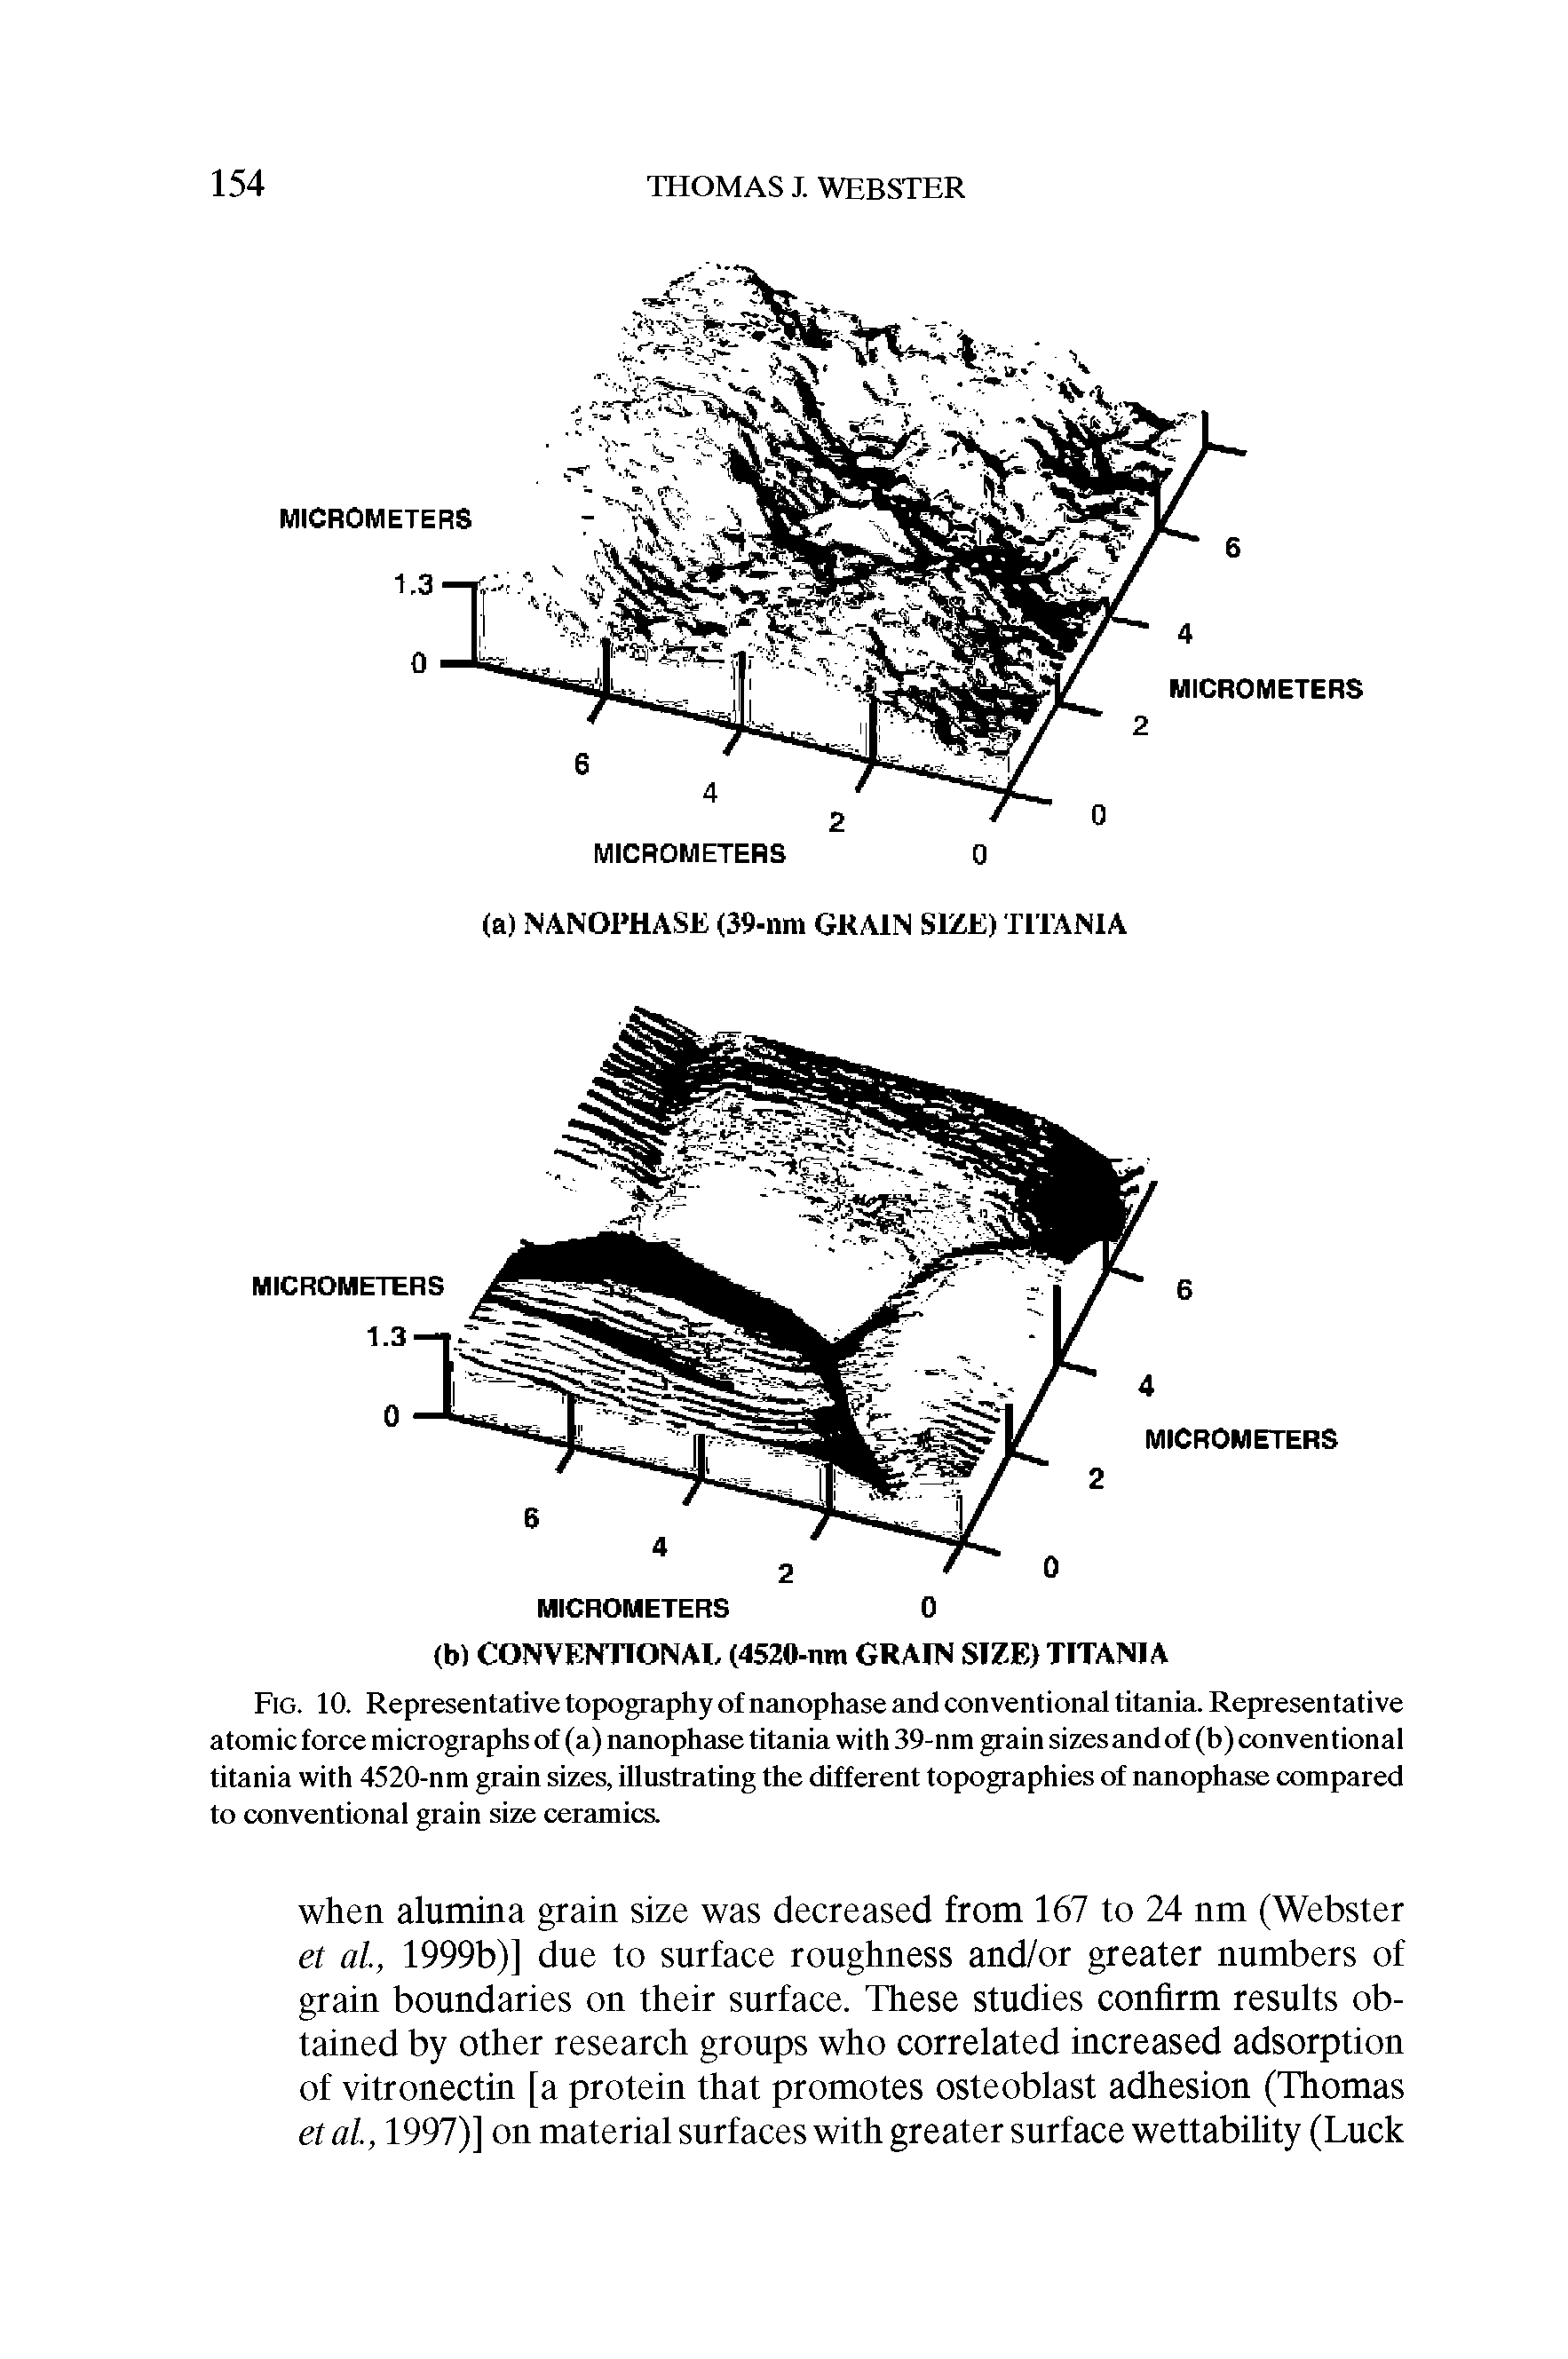 Fig. 10. Representative topography of nanophase and conventional titania. Representative atomic force micrographs of (a) nanophase titania with 39-nm grain sizes and of (b) conventional titania with 4520-nm grain sizes, illustrating the different topographies of nanophase compared to conventional grain size ceramics.